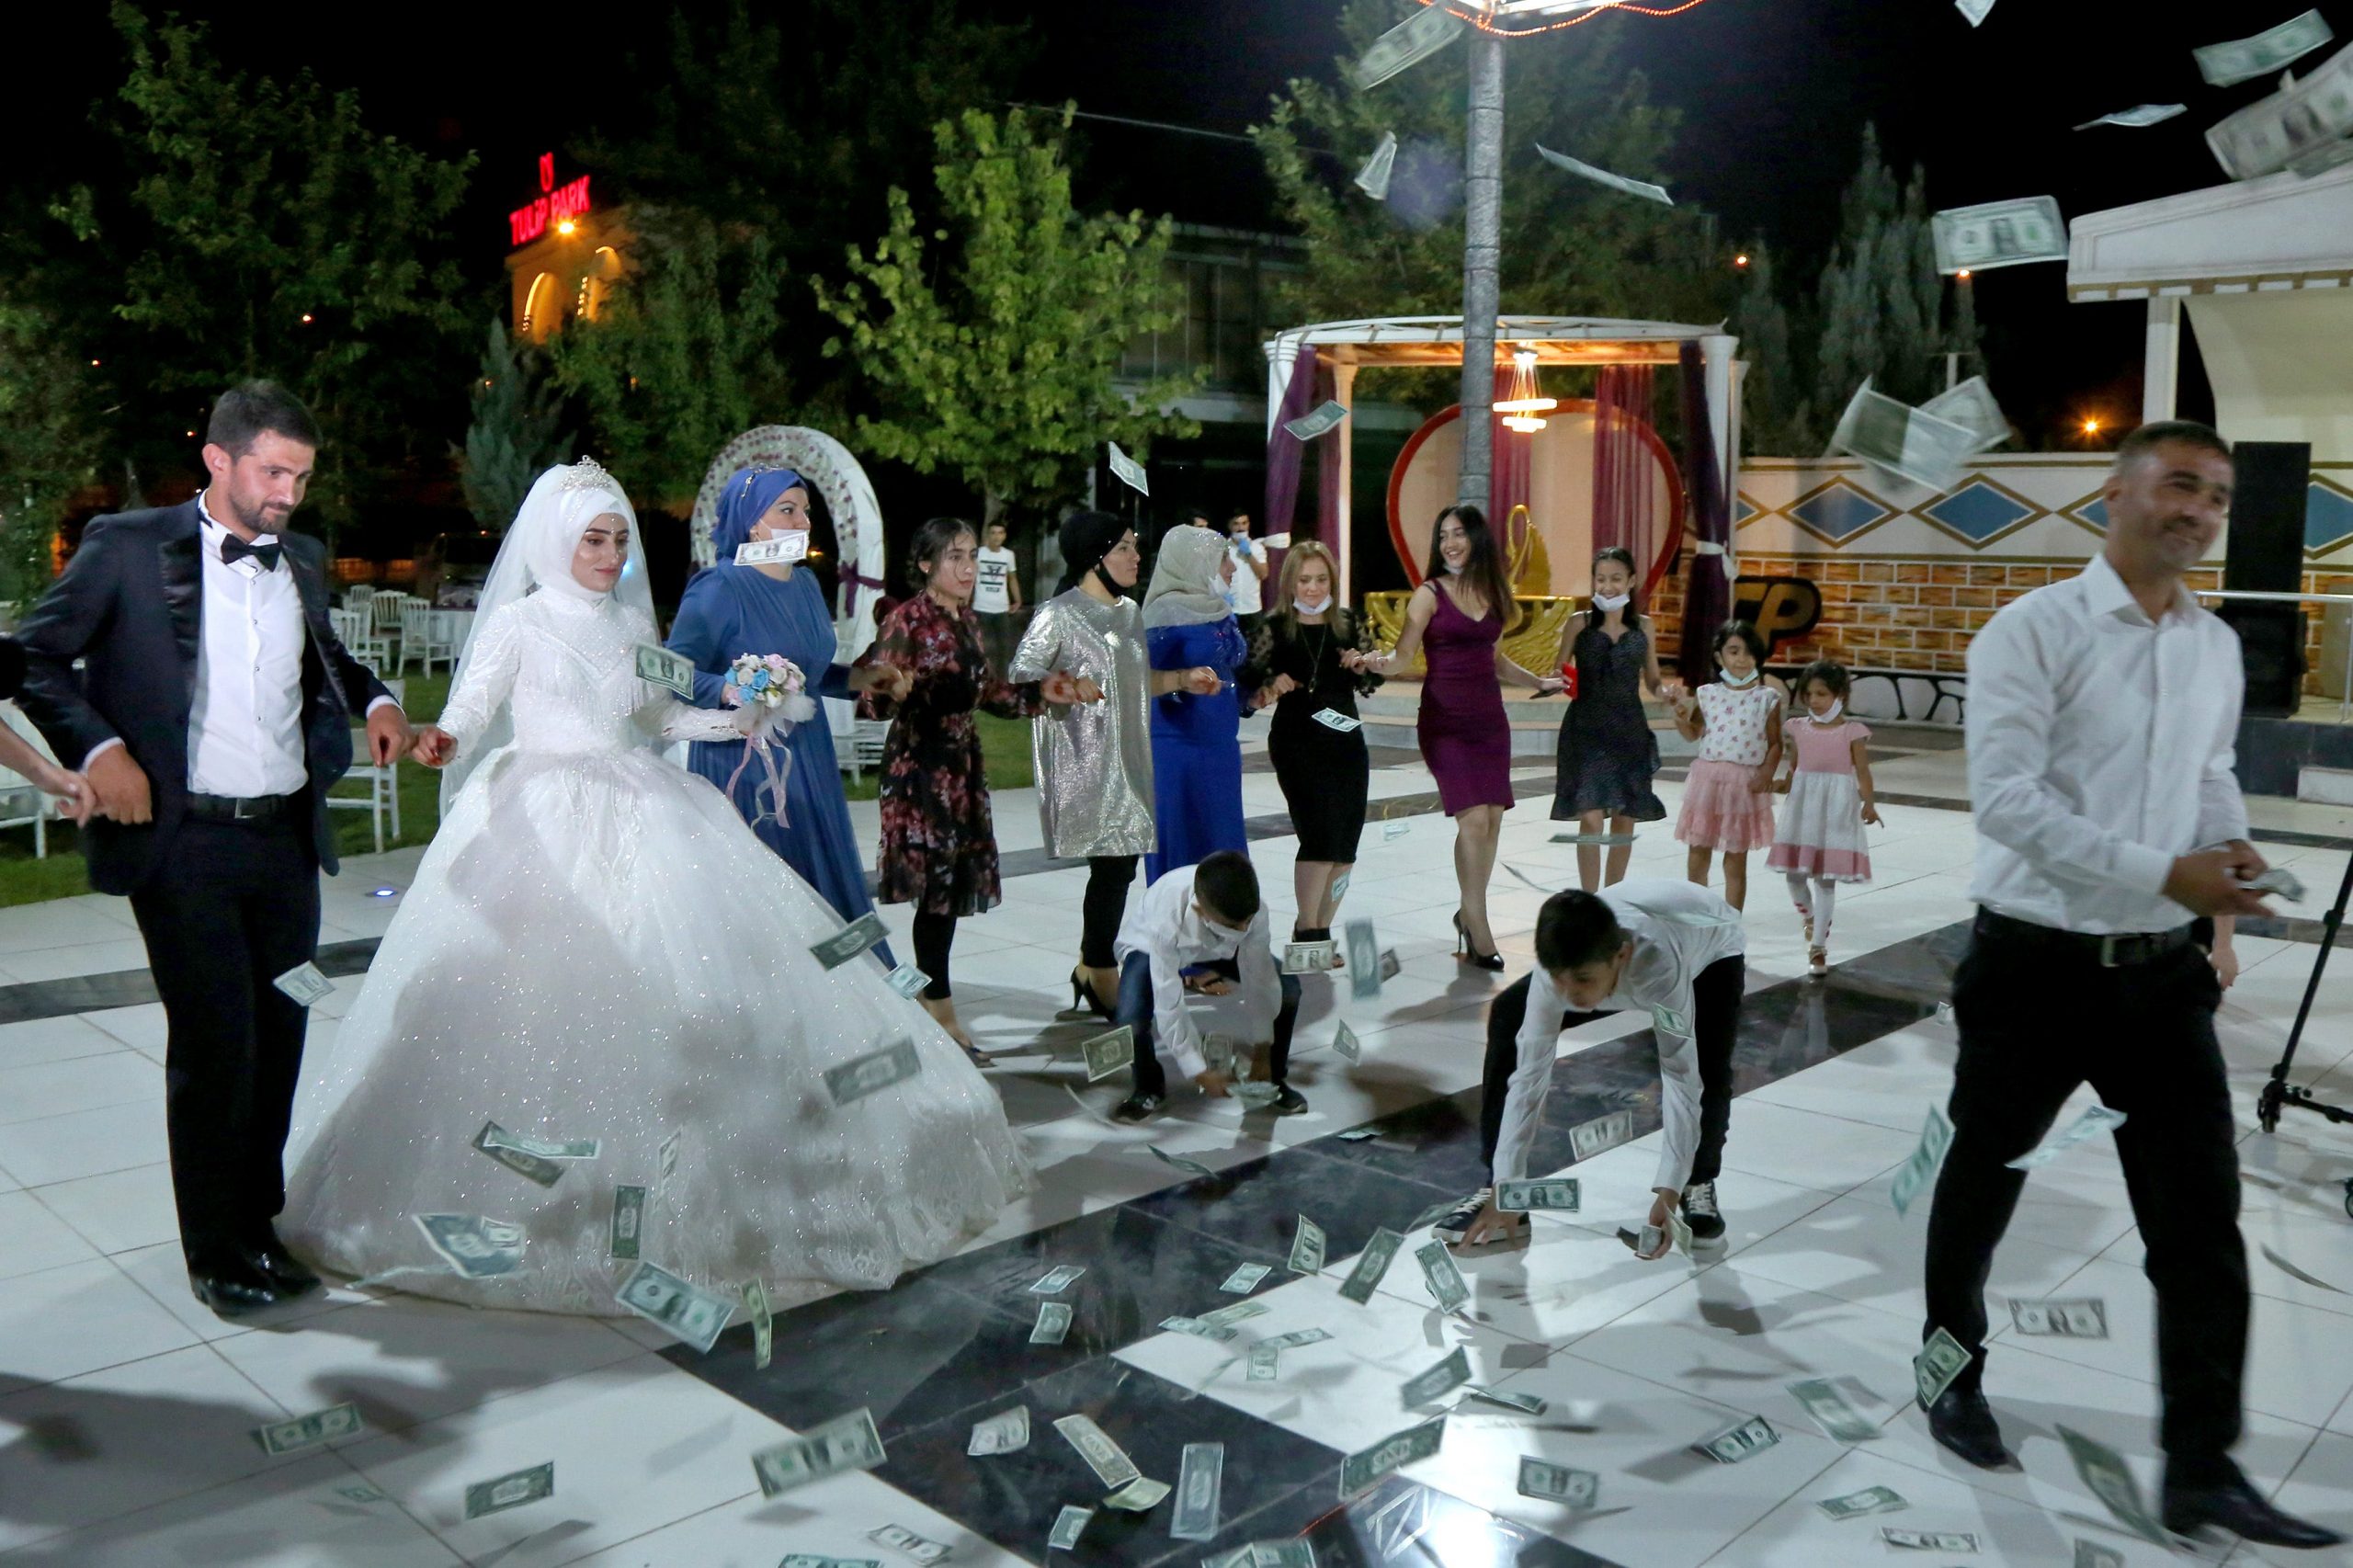 Groom Serdal Aman and bride Filiz Peker dance with their relatives during their wedding after Turkey lifted restrictions on the ceremonies which had been imposed to prevent the spread of the coronavirus disease (COVID-19), in Diyarbakir, Turkey, July 1, 2020. REUTERS/Sertac Kayar